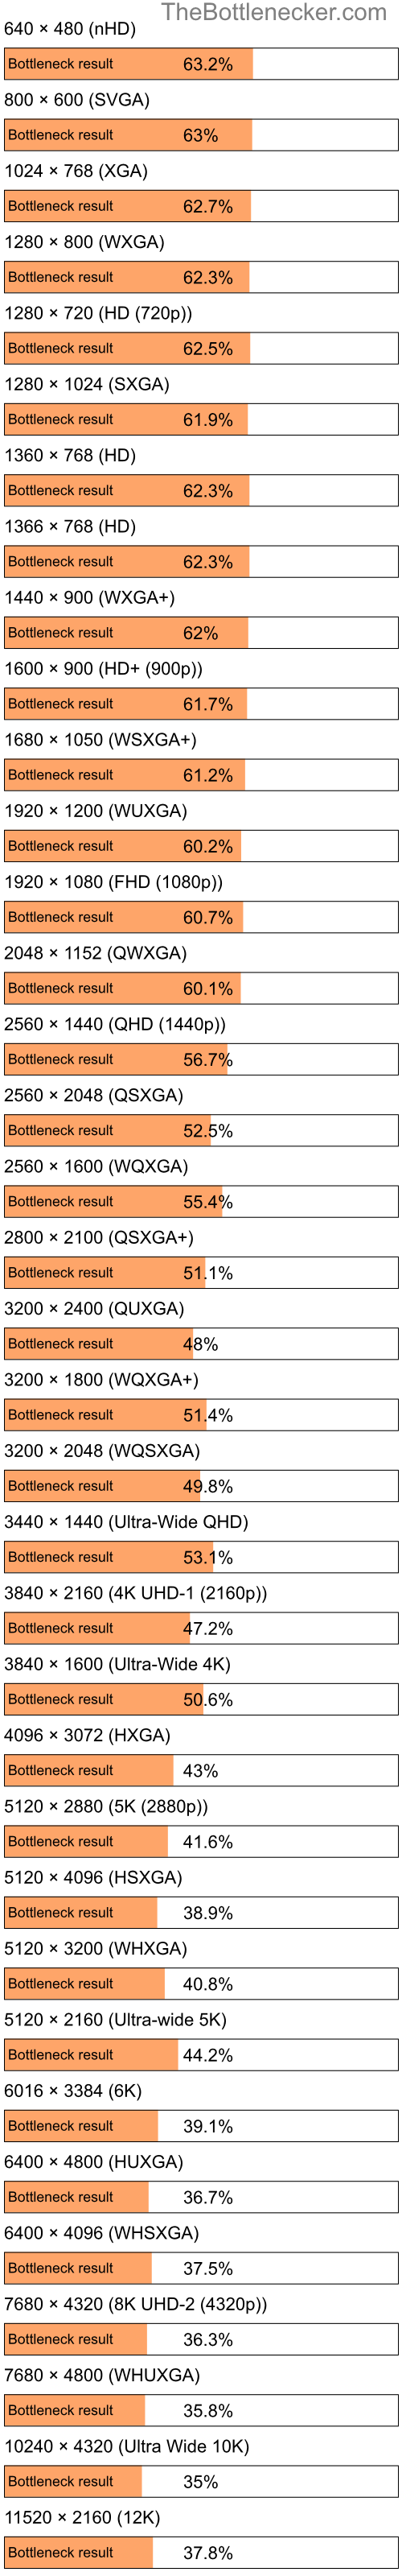 Bottleneck results by resolution for Intel Core i5-2450M and NVIDIA GeForce RTX 4060 in Graphic Card Intense Tasks